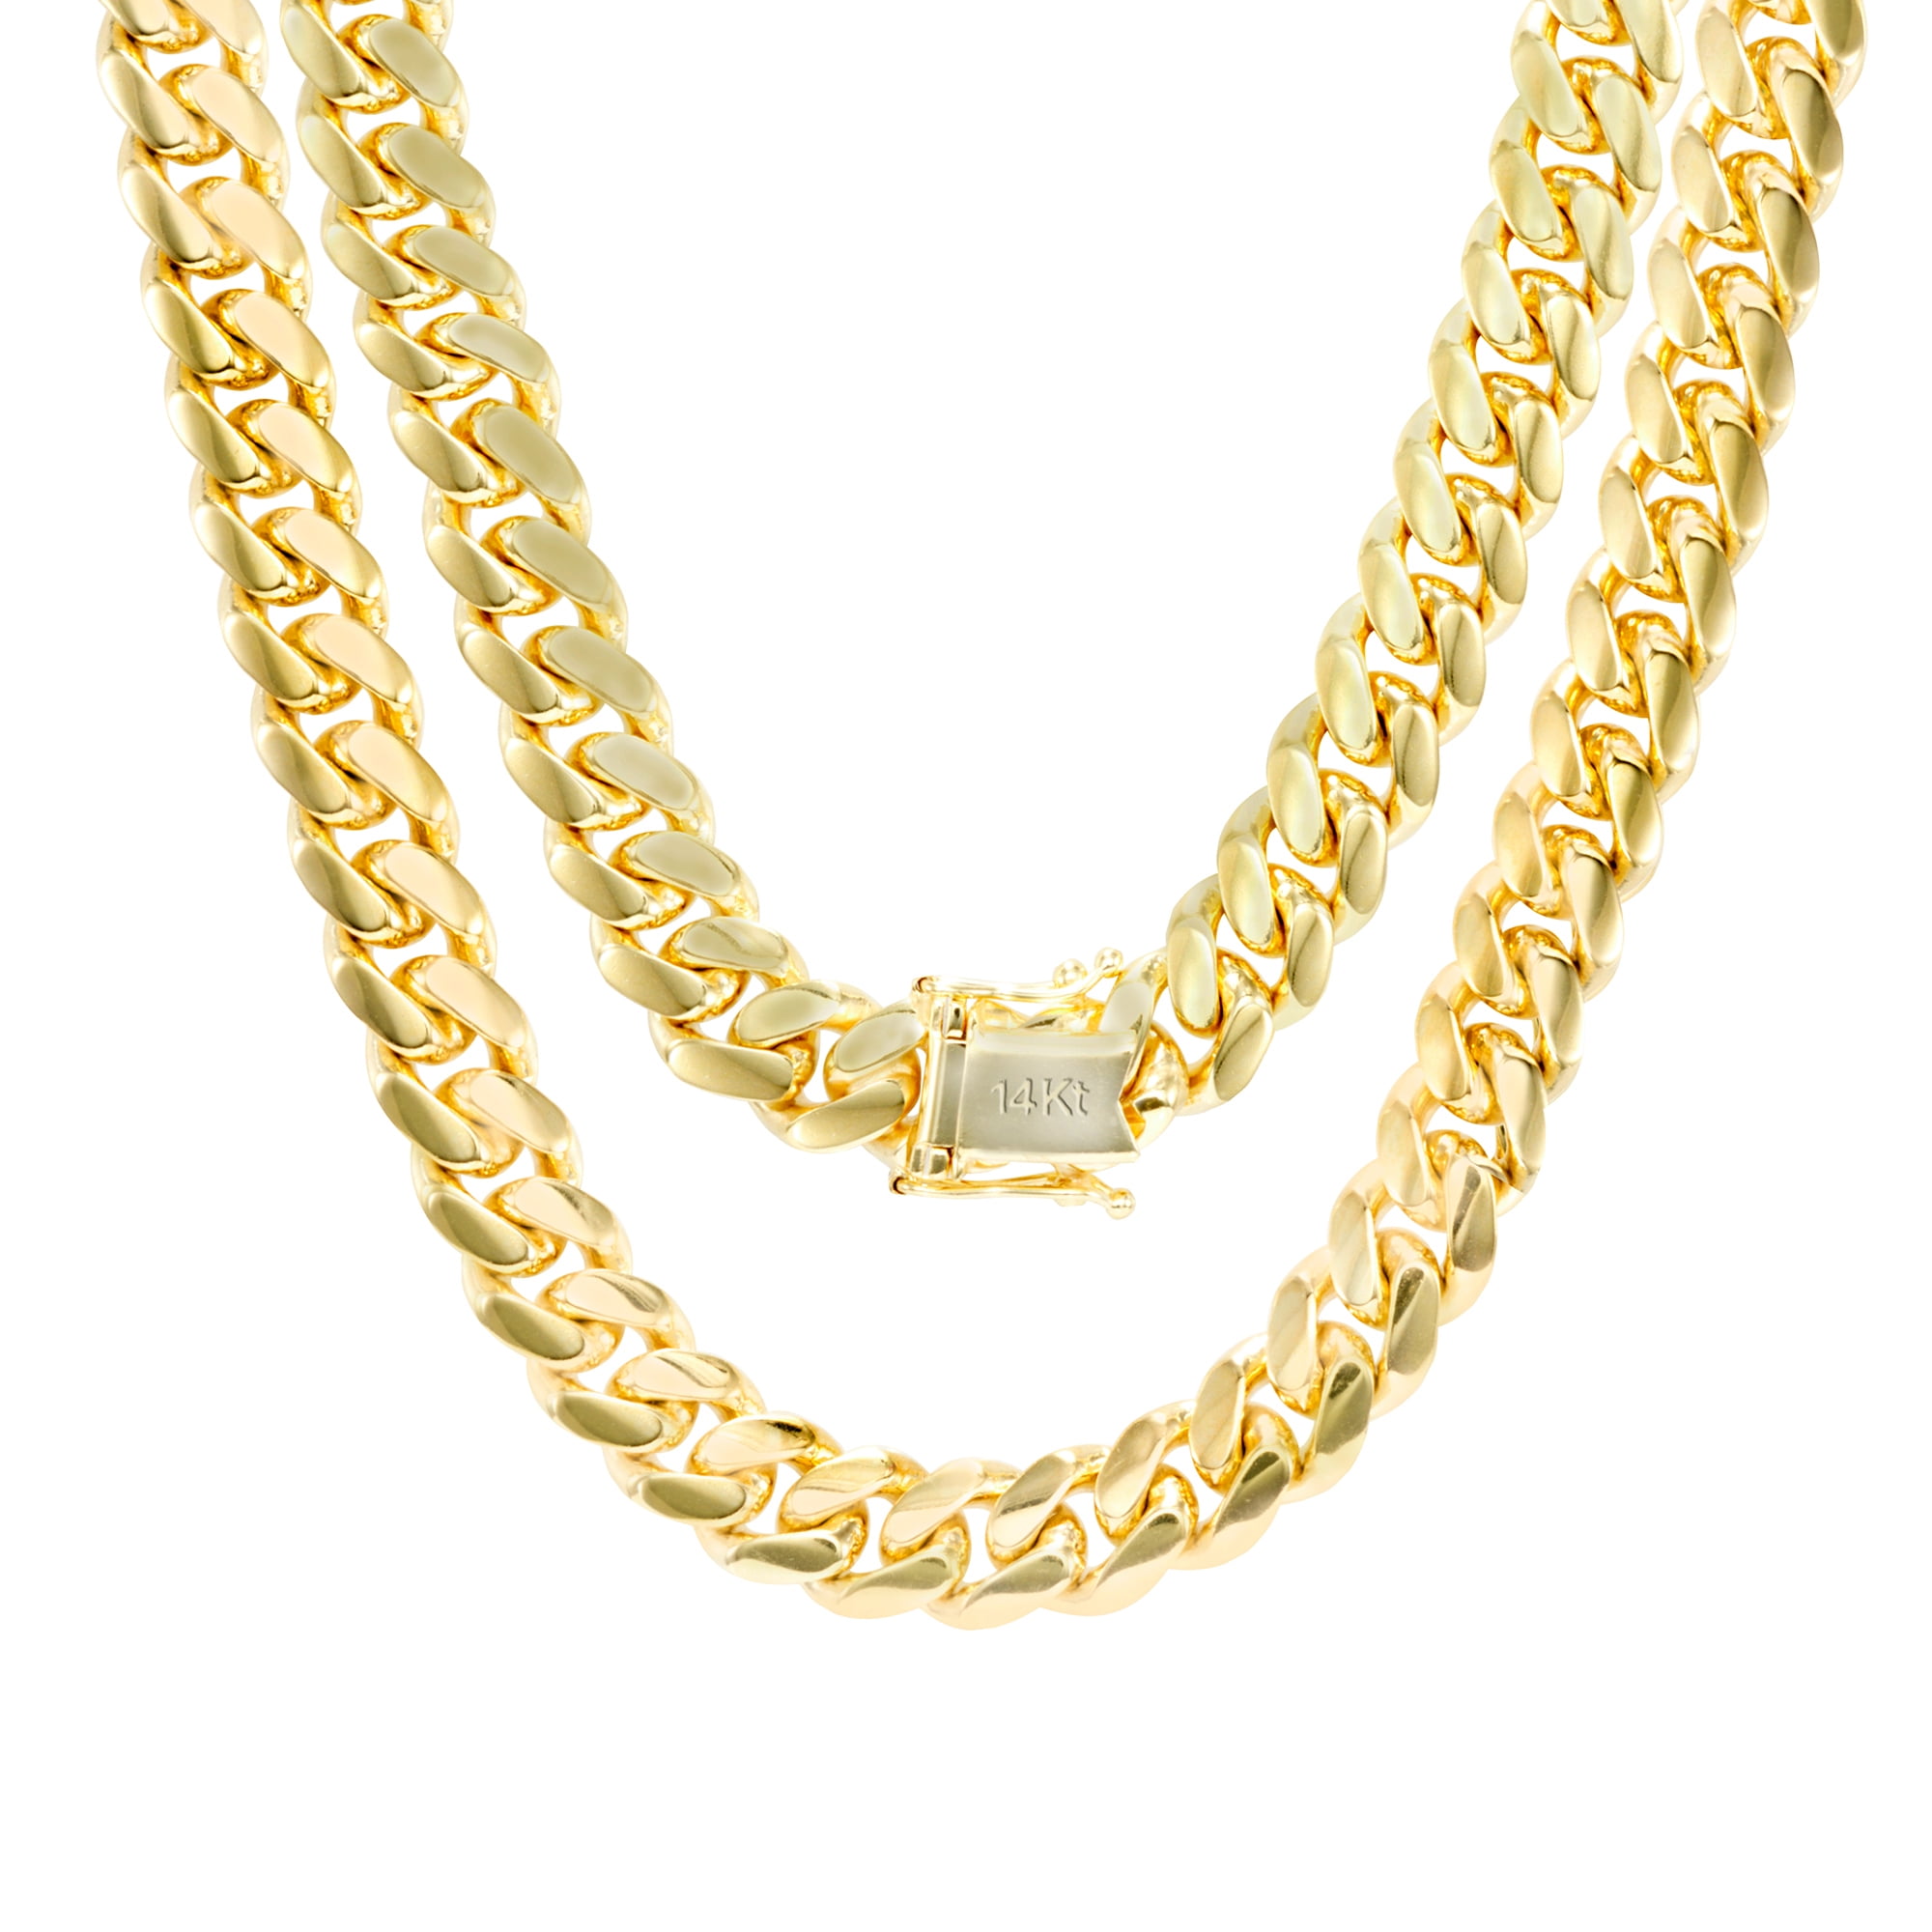 Nuragold - 14K Yellow Gold Solid Mens 8mm Miami Cuban Link Chain